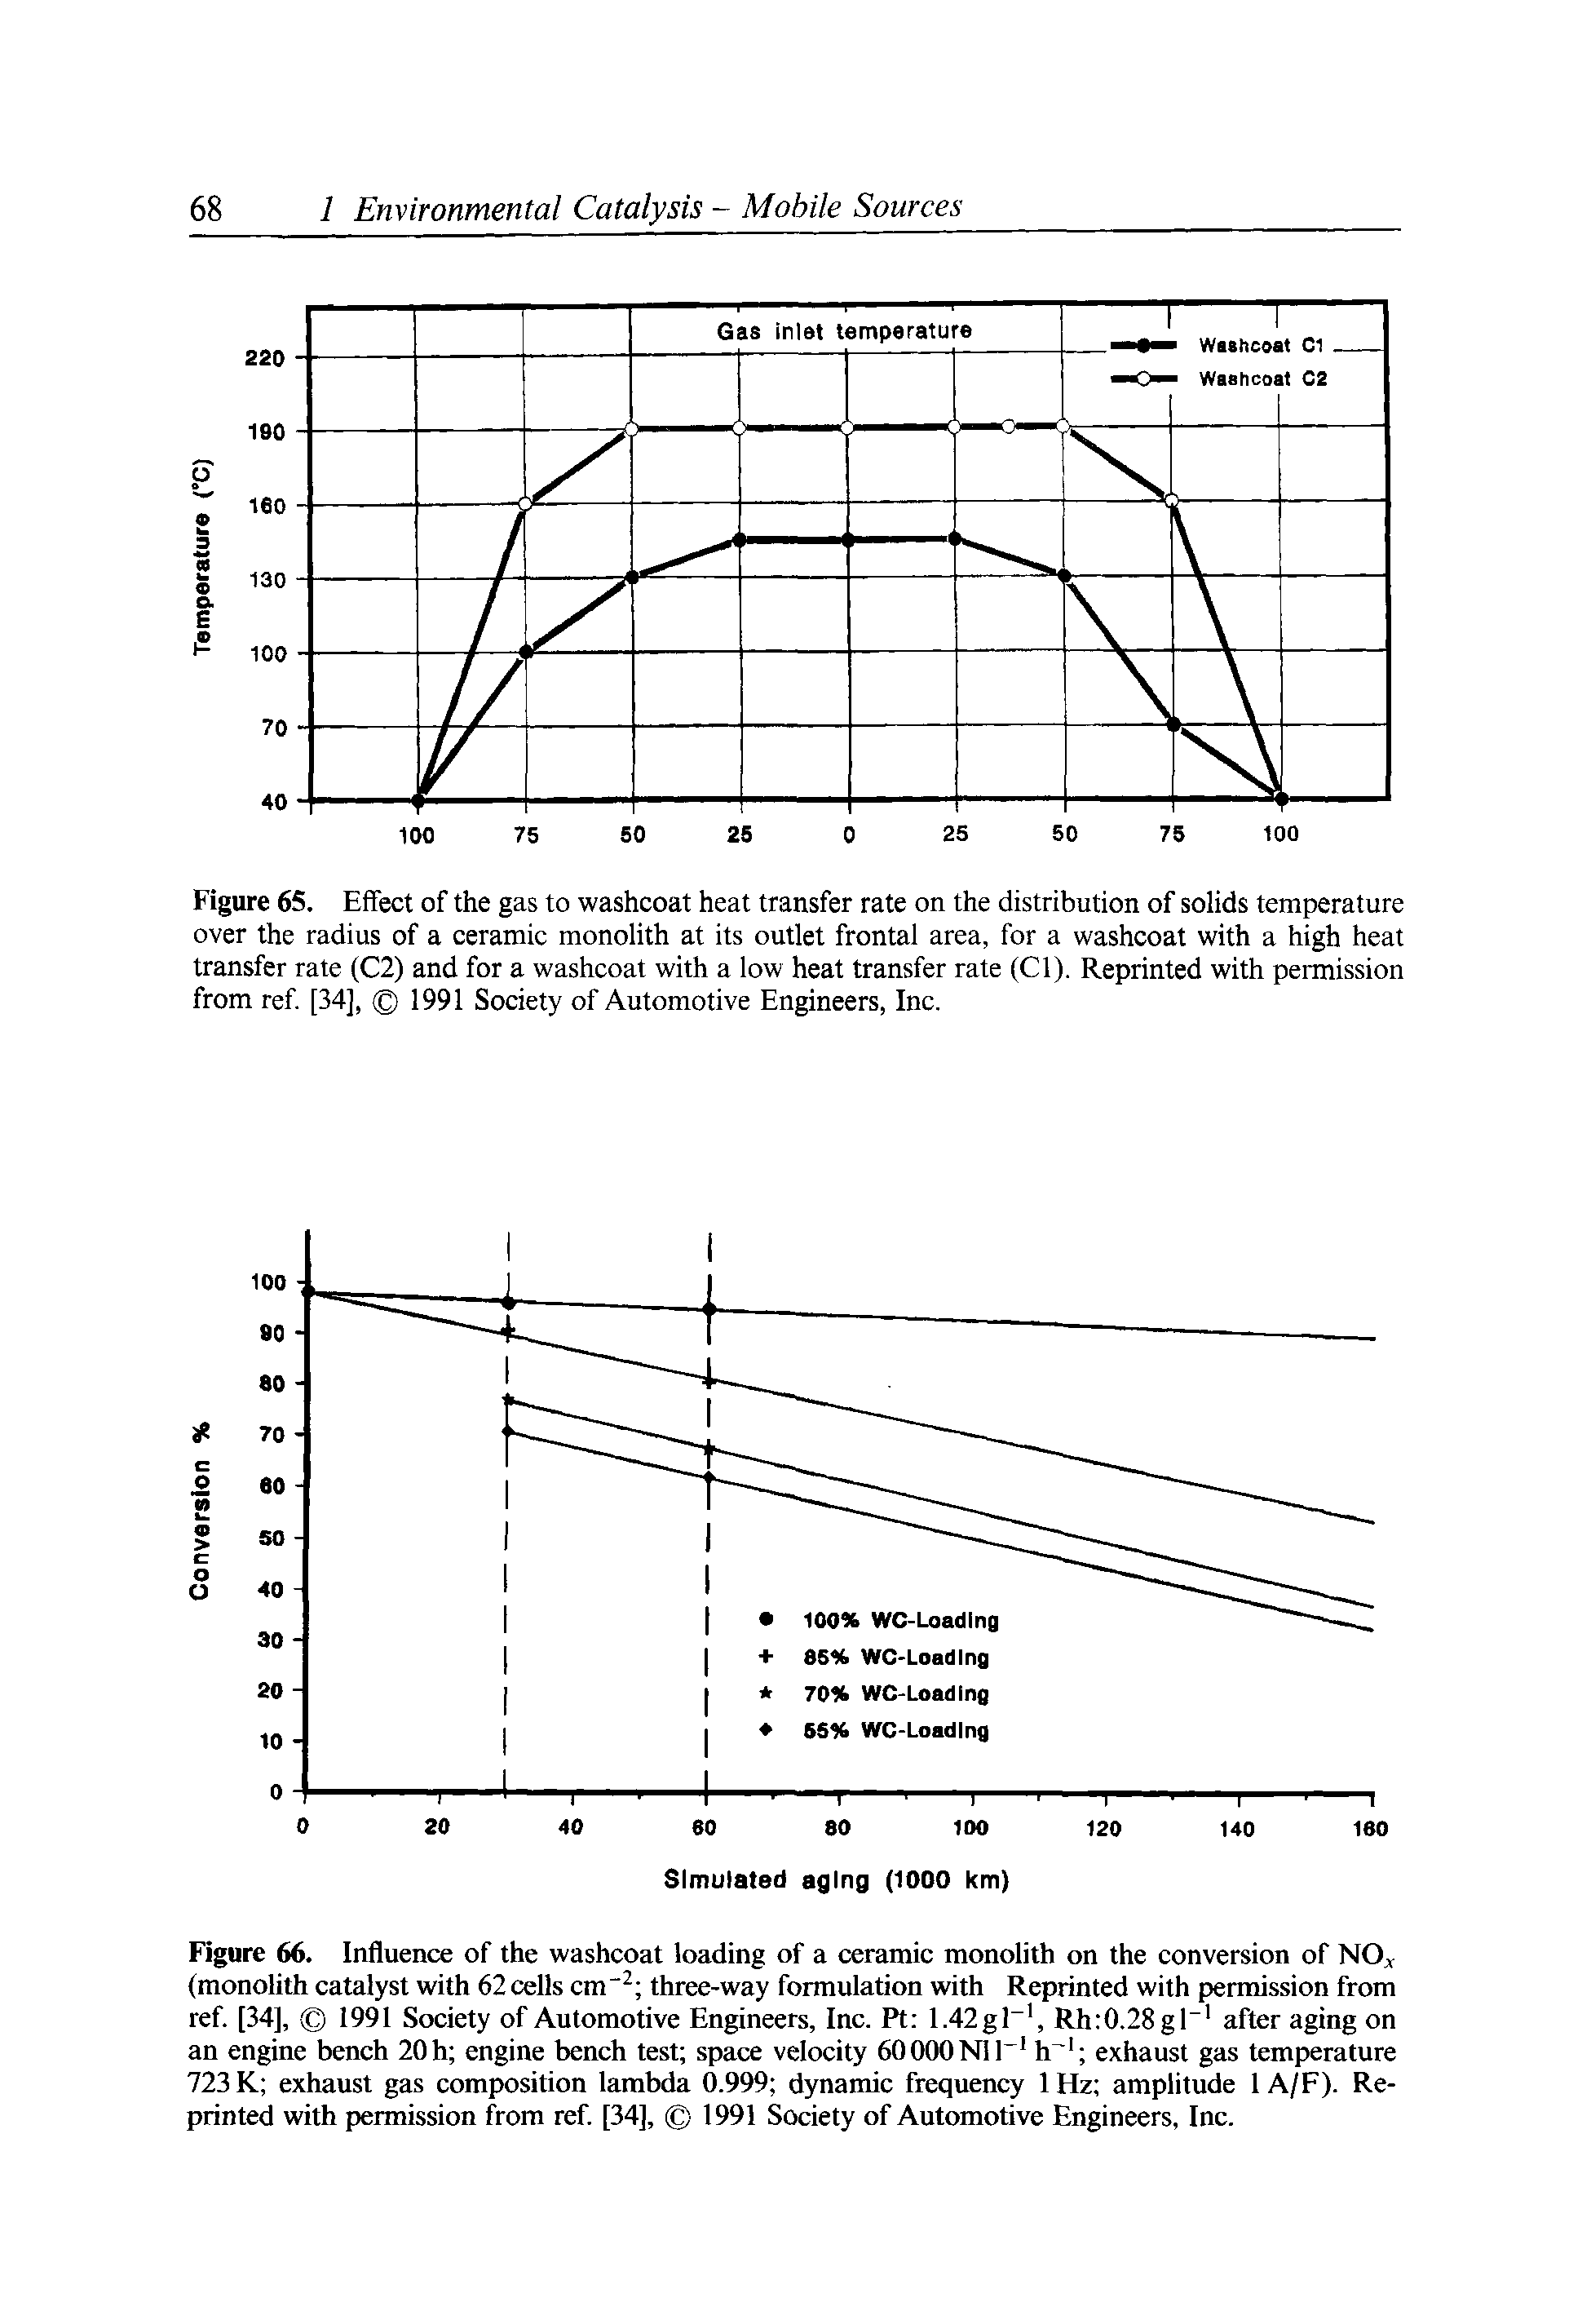 Figure 65. Effect of the gas to washcoat heat transfer rate on the distribution of solids temperature over the radius of a ceramic monolith at its outlet frontal area, for a washcoat with a high heat transfer rate (C2) and for a washcoat with a low heat transfer rate (Cl). Reprinted with permission from ref [34], 1991 Society of Automotive Engineers, Inc.